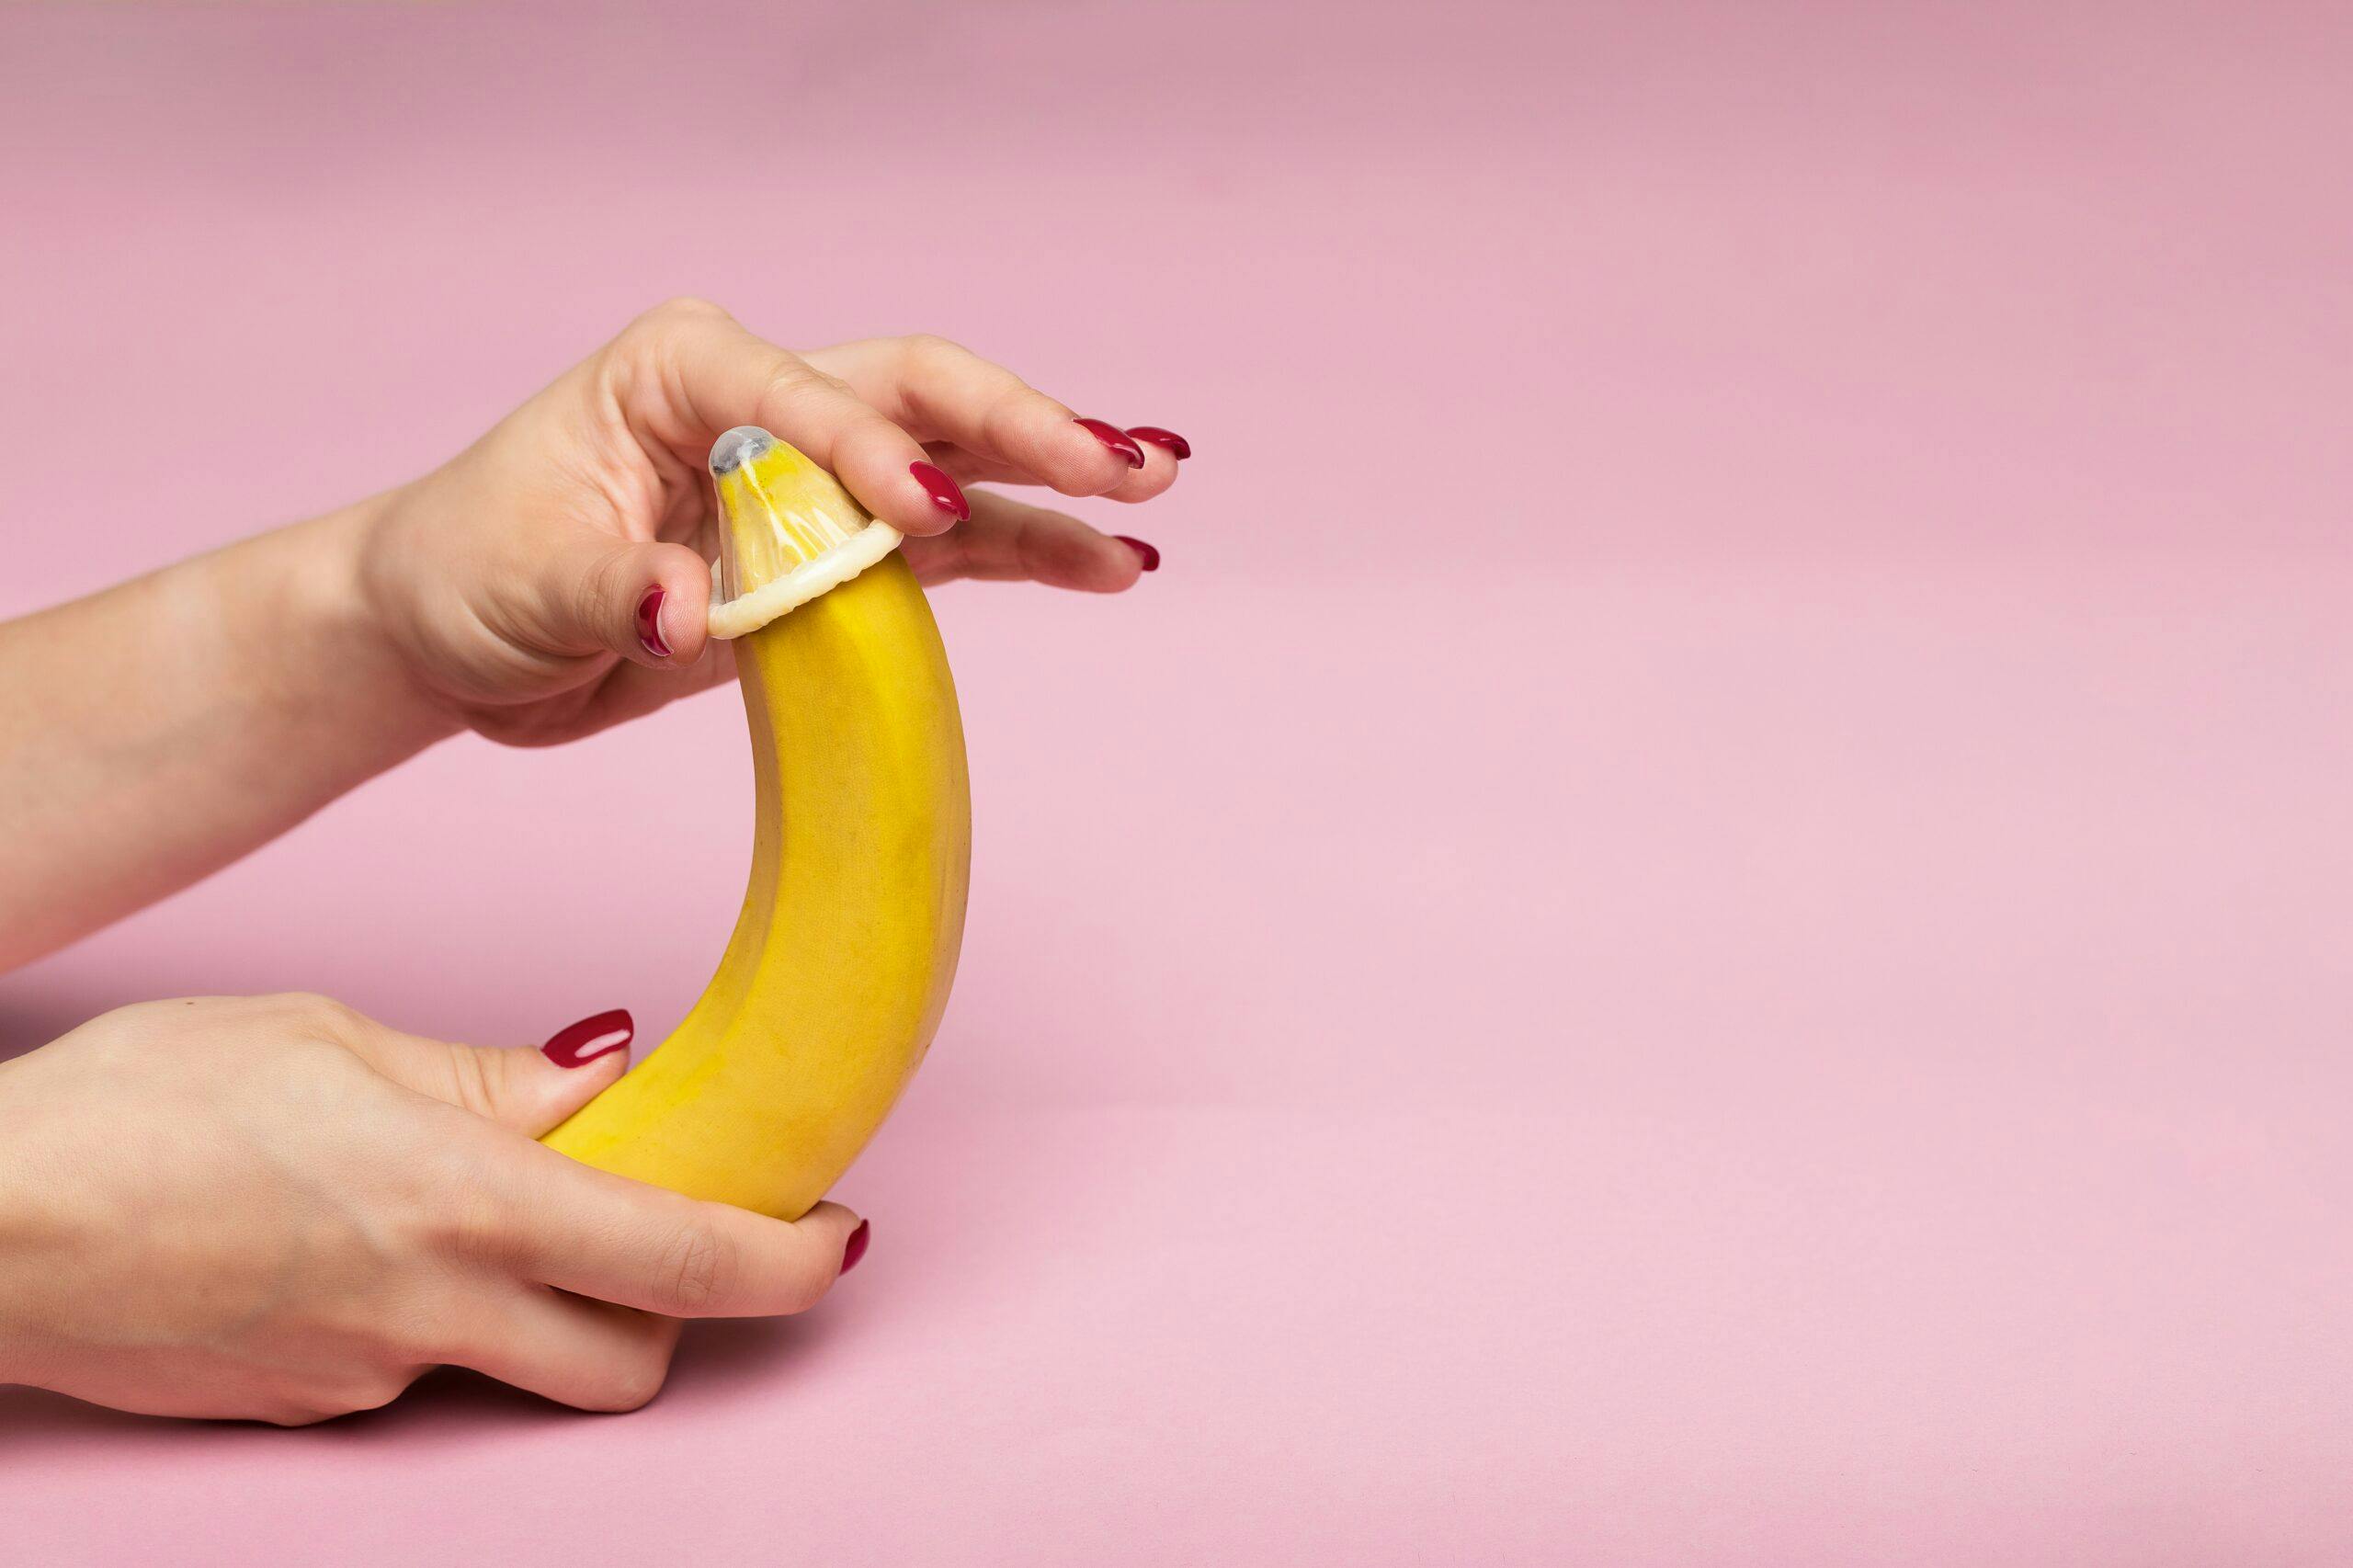 Someone putting a condom on a banana.